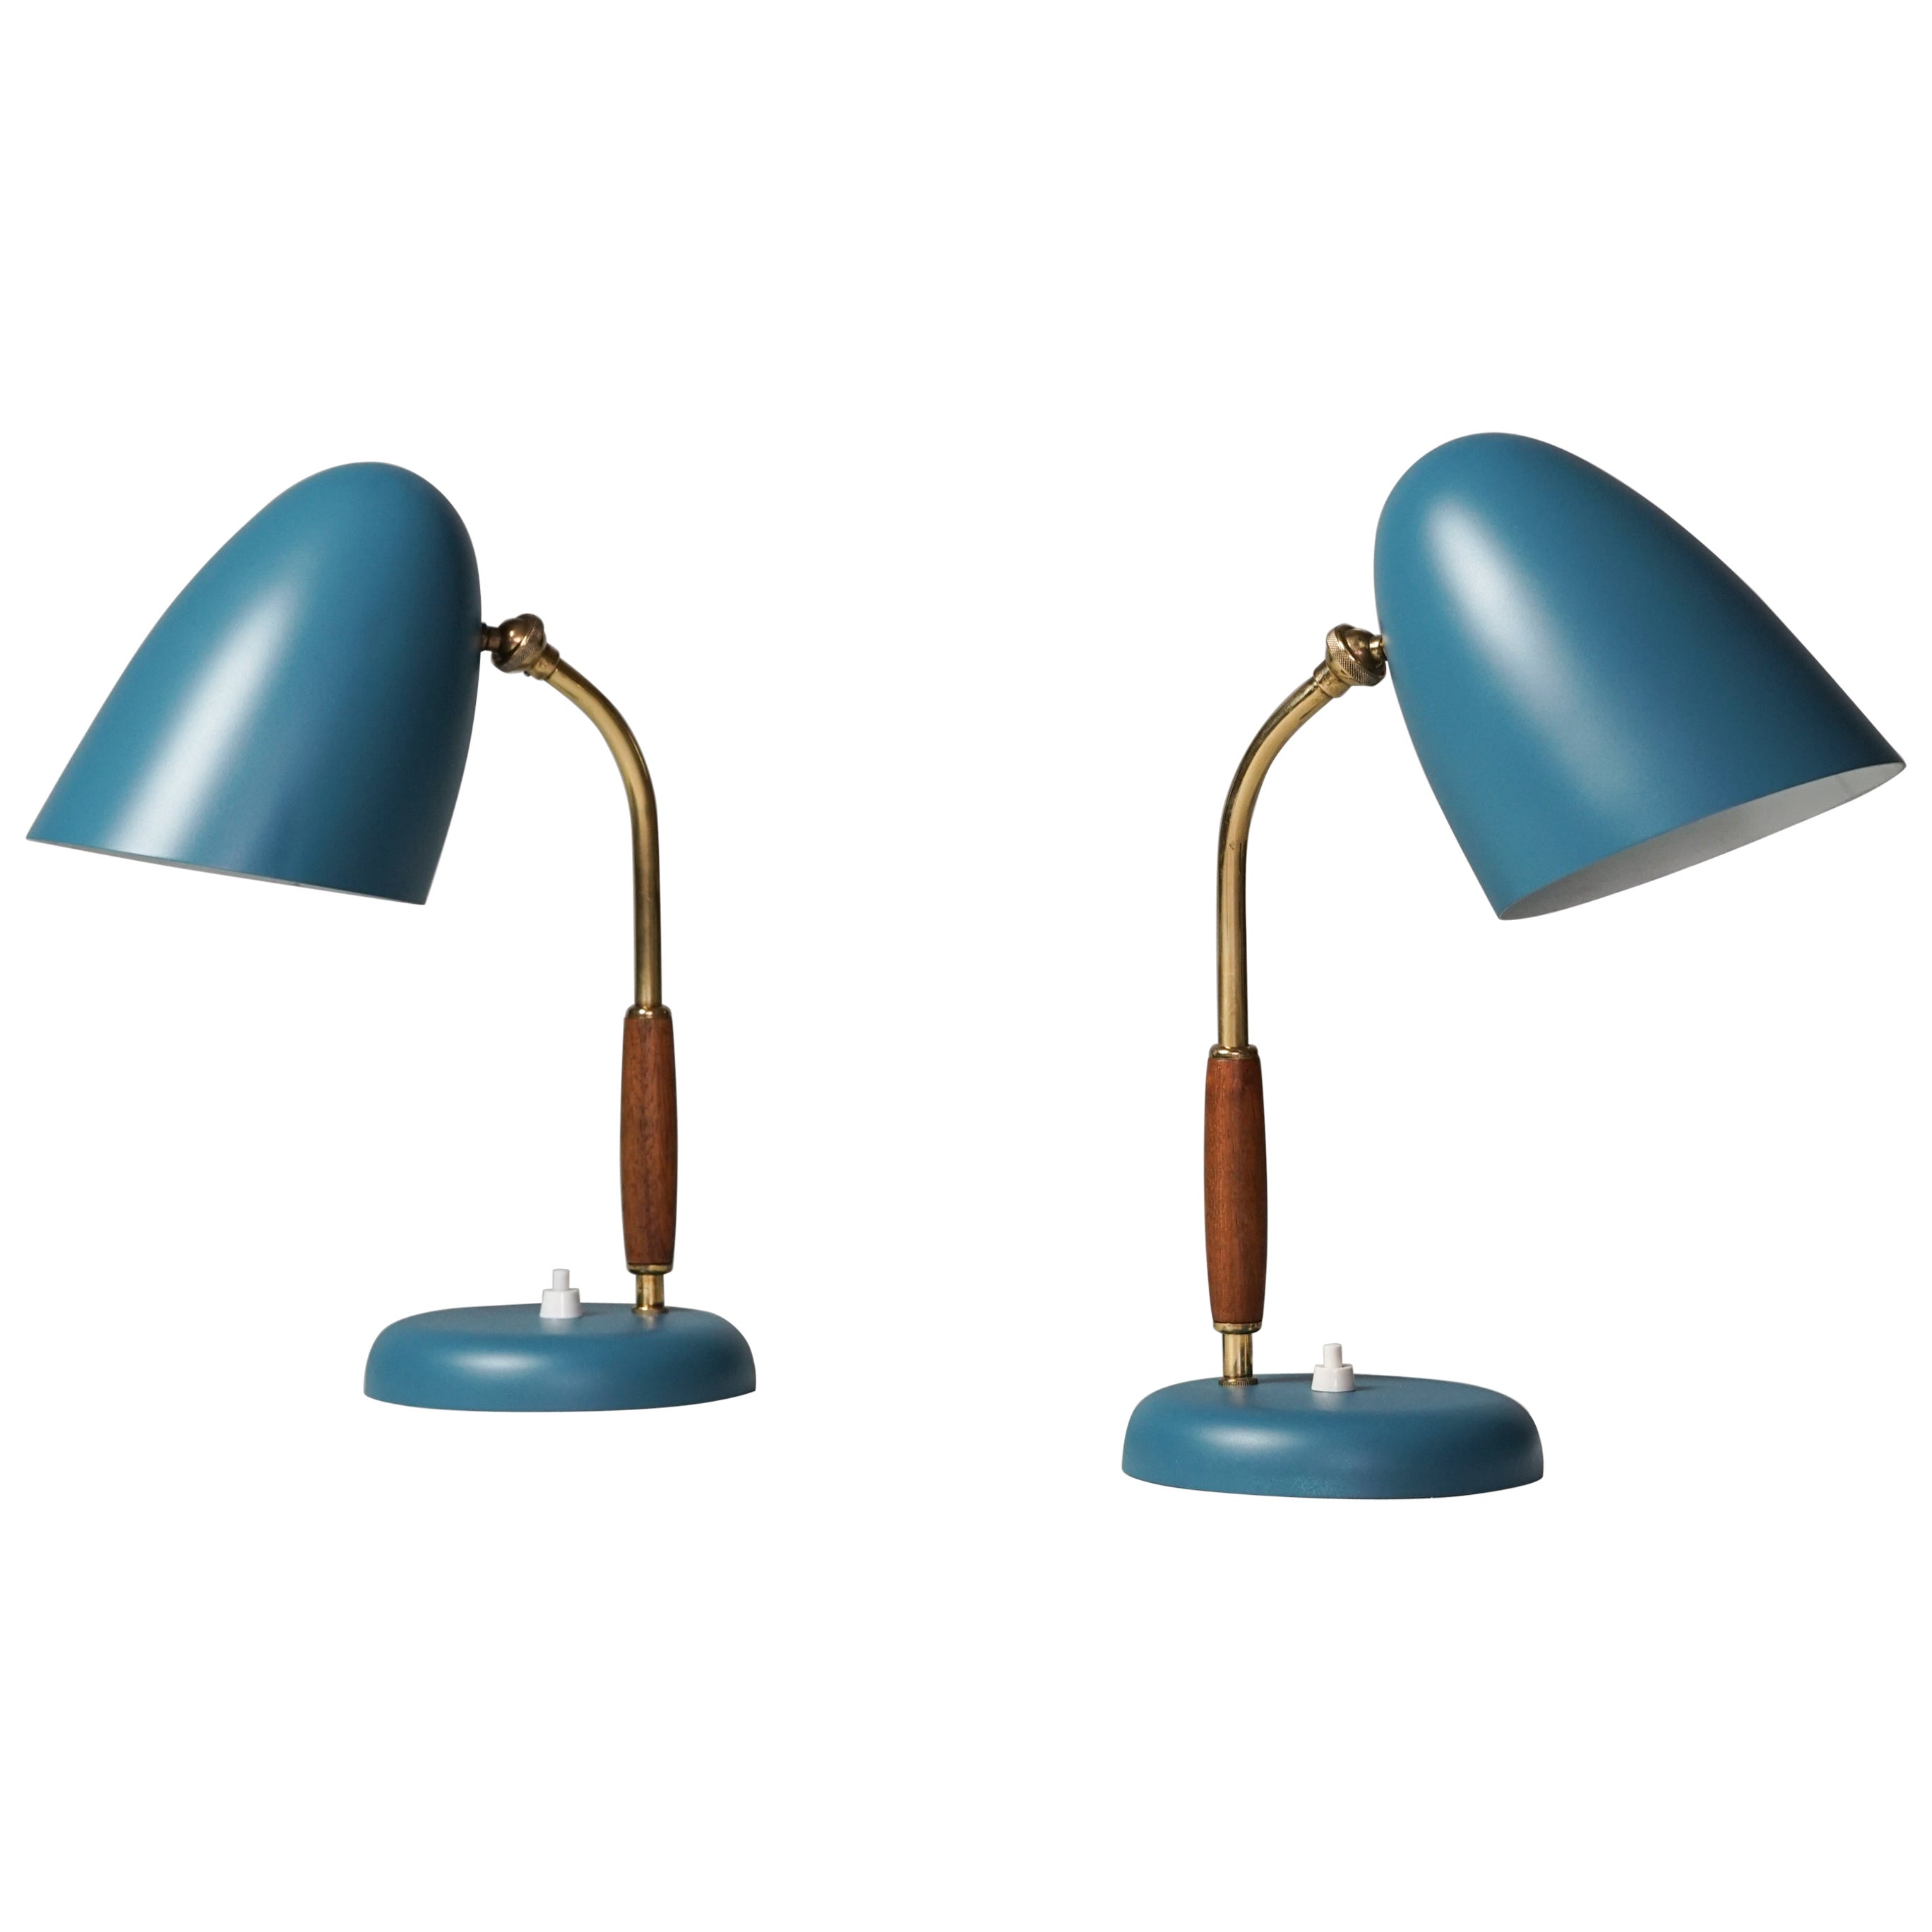 Pair of Table Lamps, Attributed to Lisa Johansson-Pape, Oy Stockmann AB, 1950s For Sale